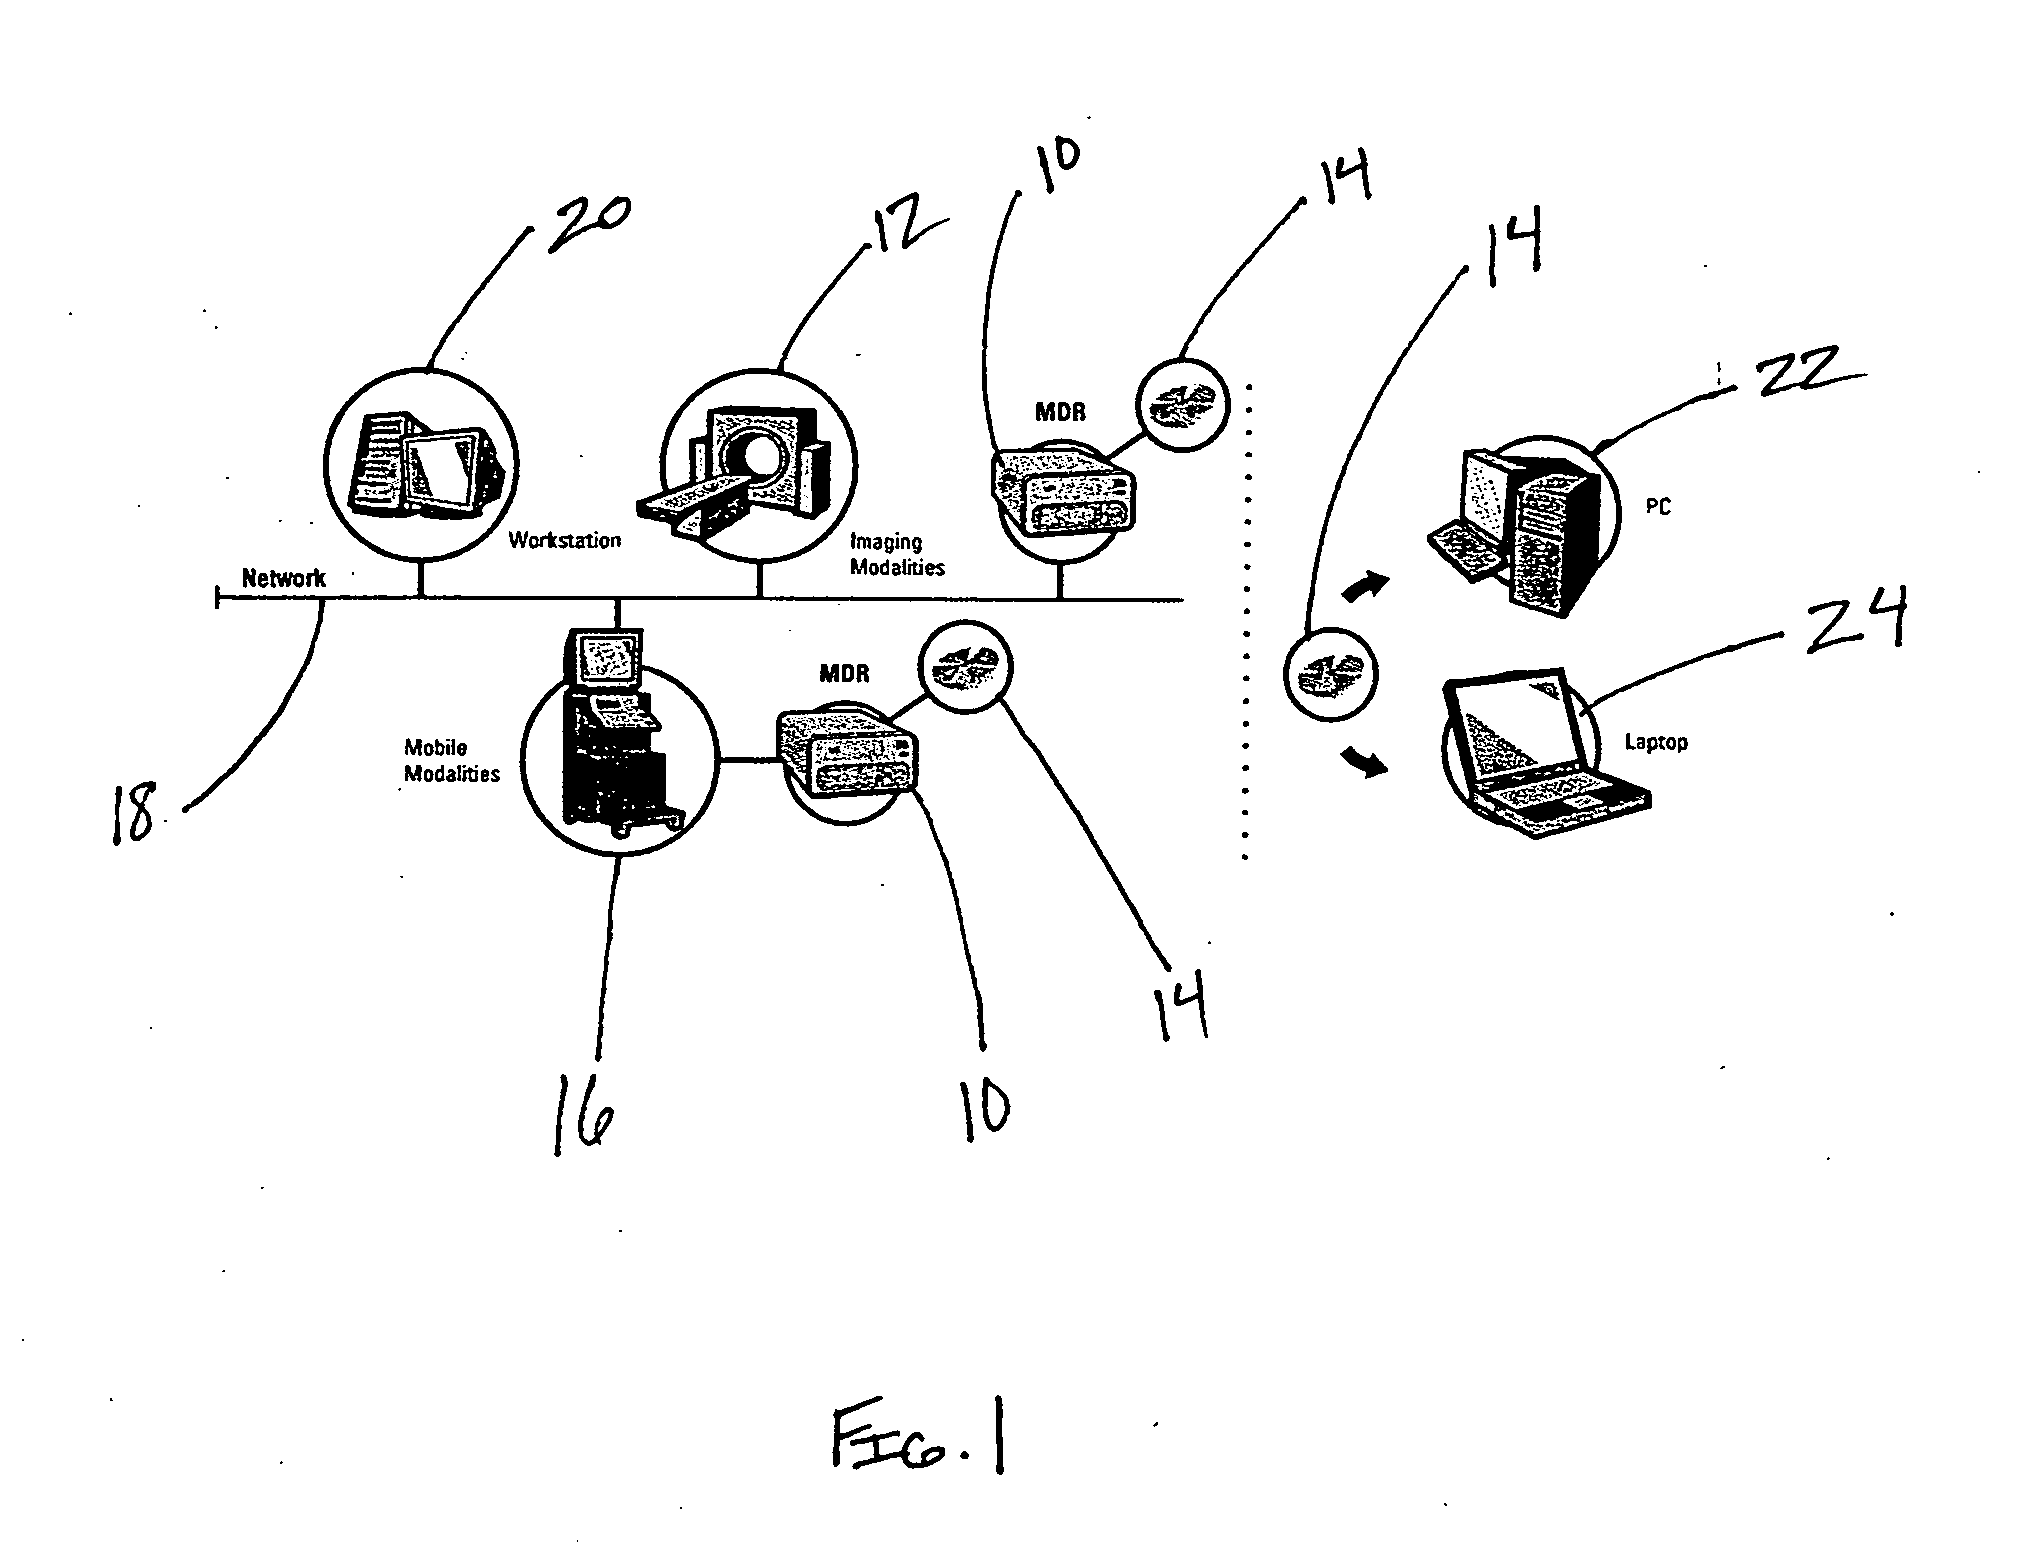 System and method for recording medical image data on digital recording media